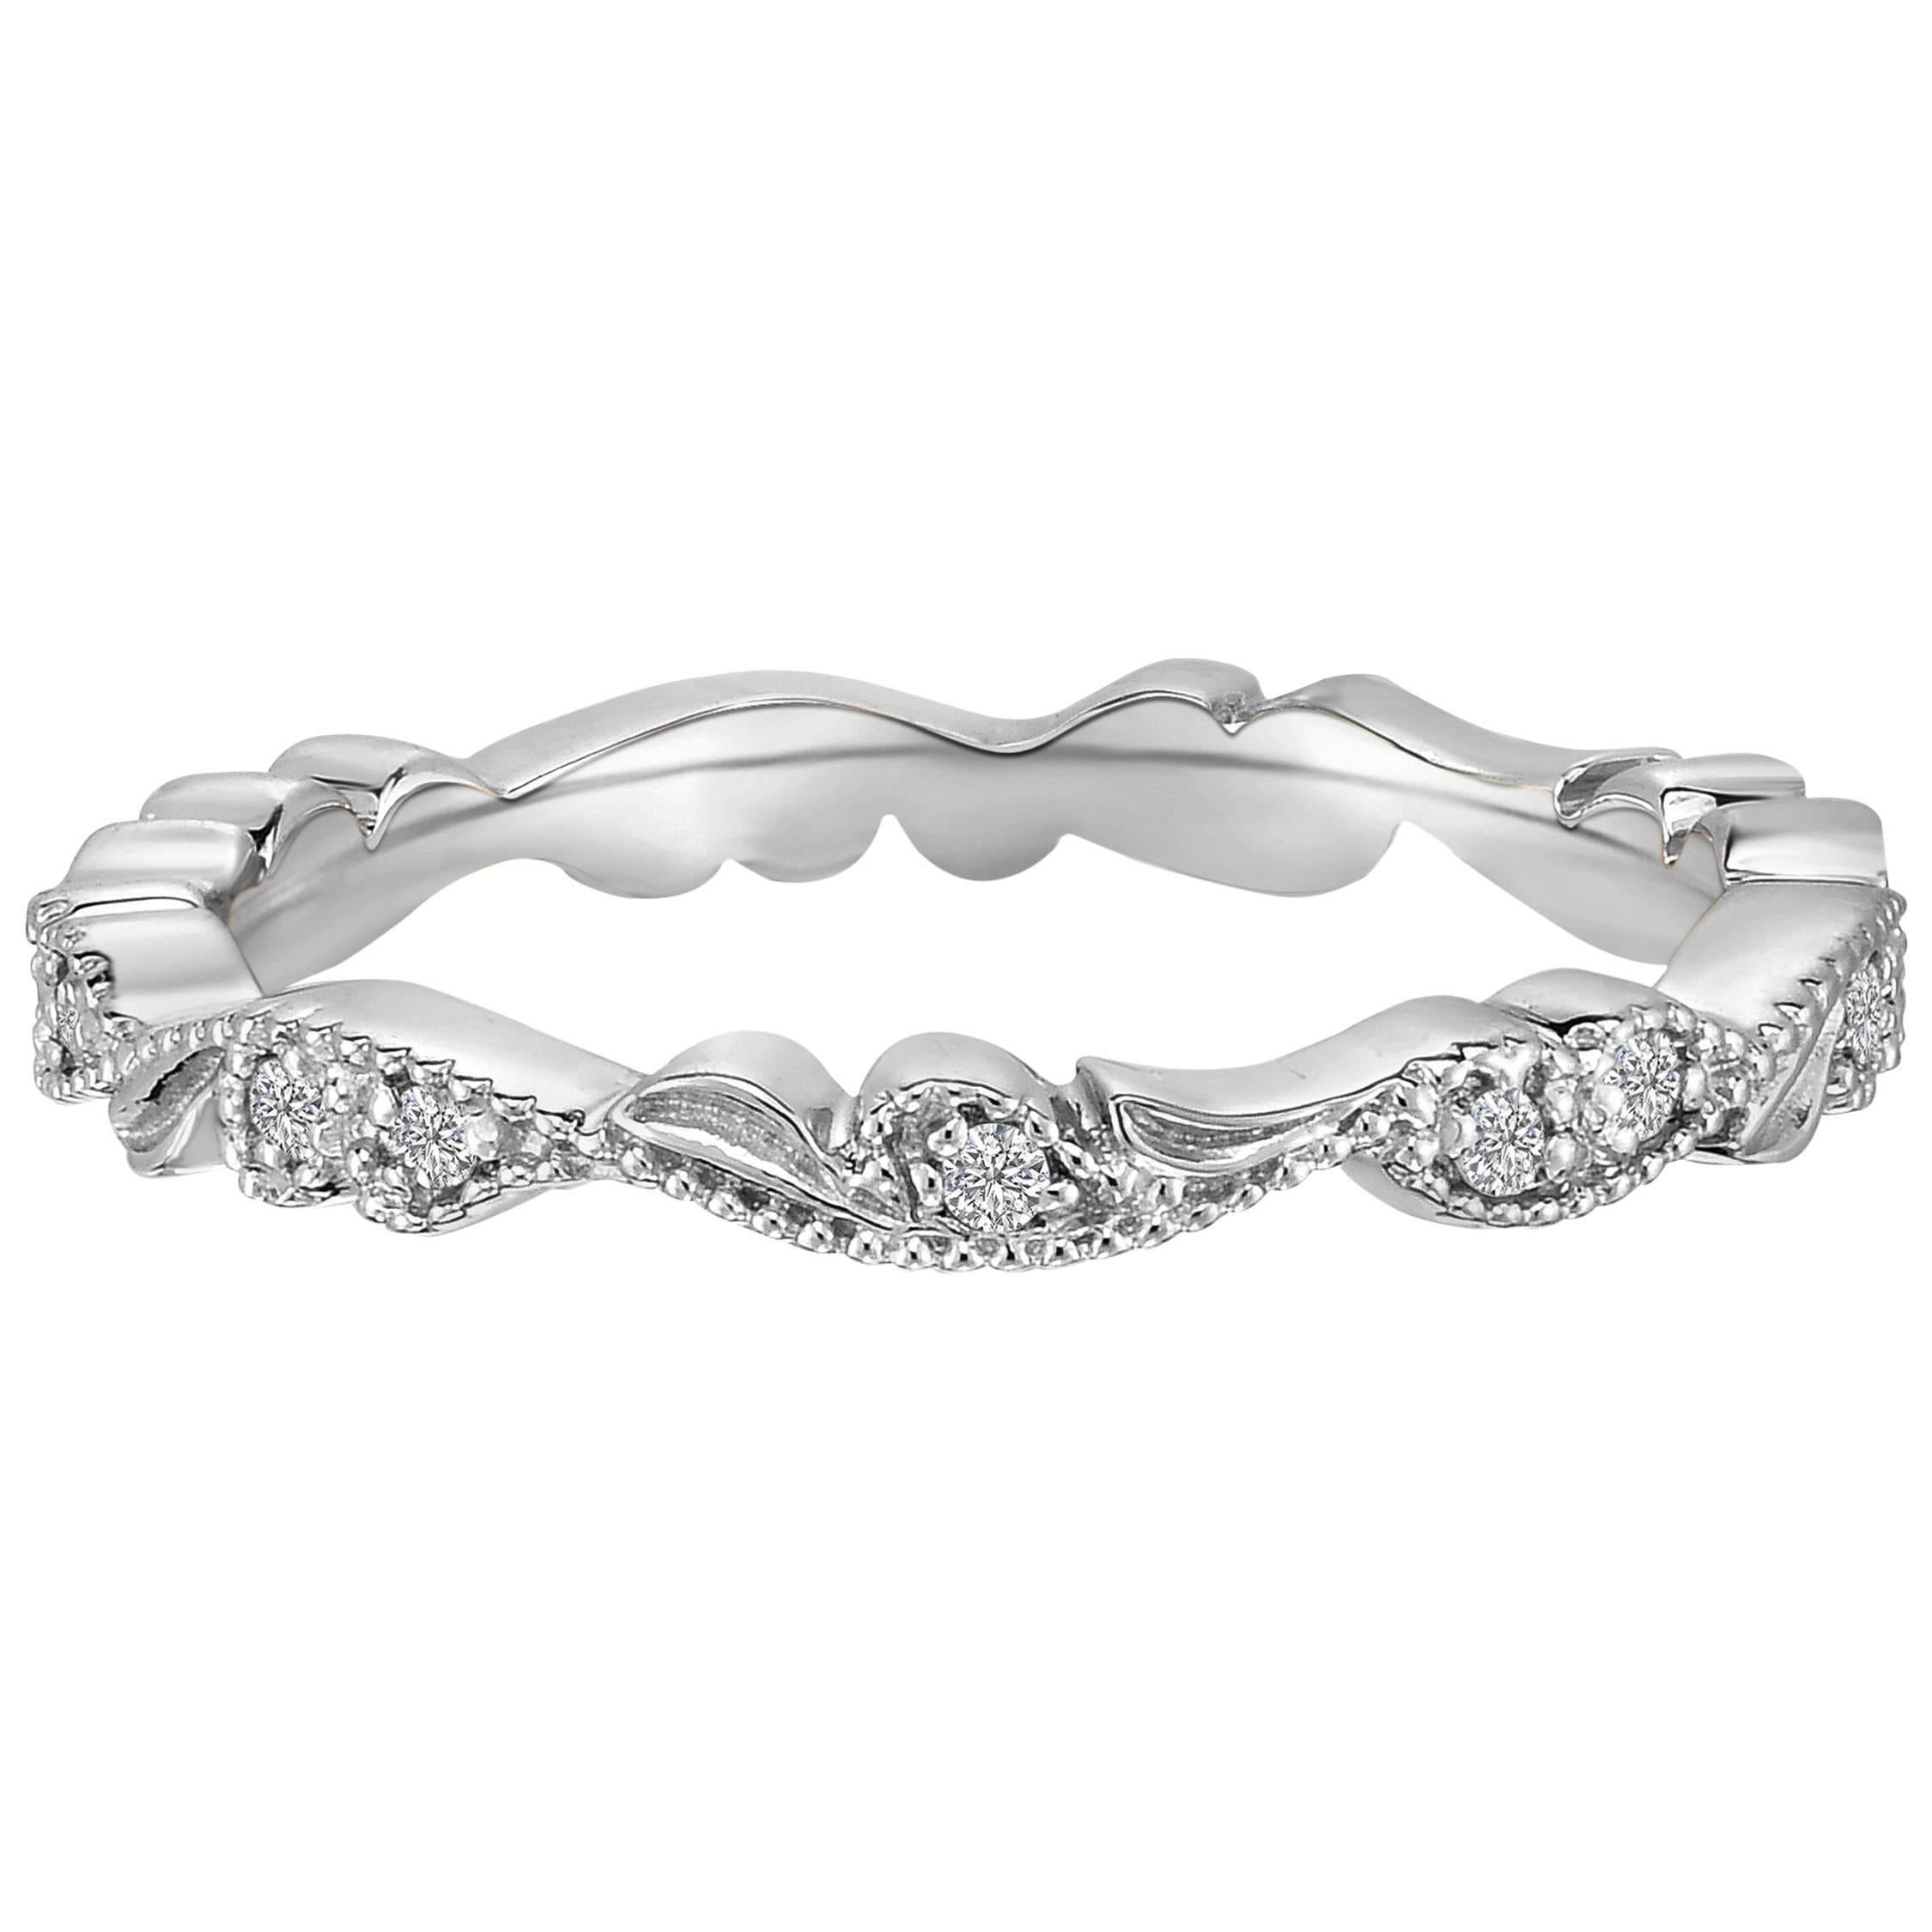 Marisa Perry Diamond Platinum Chantilly Lace Band Ring For Sale